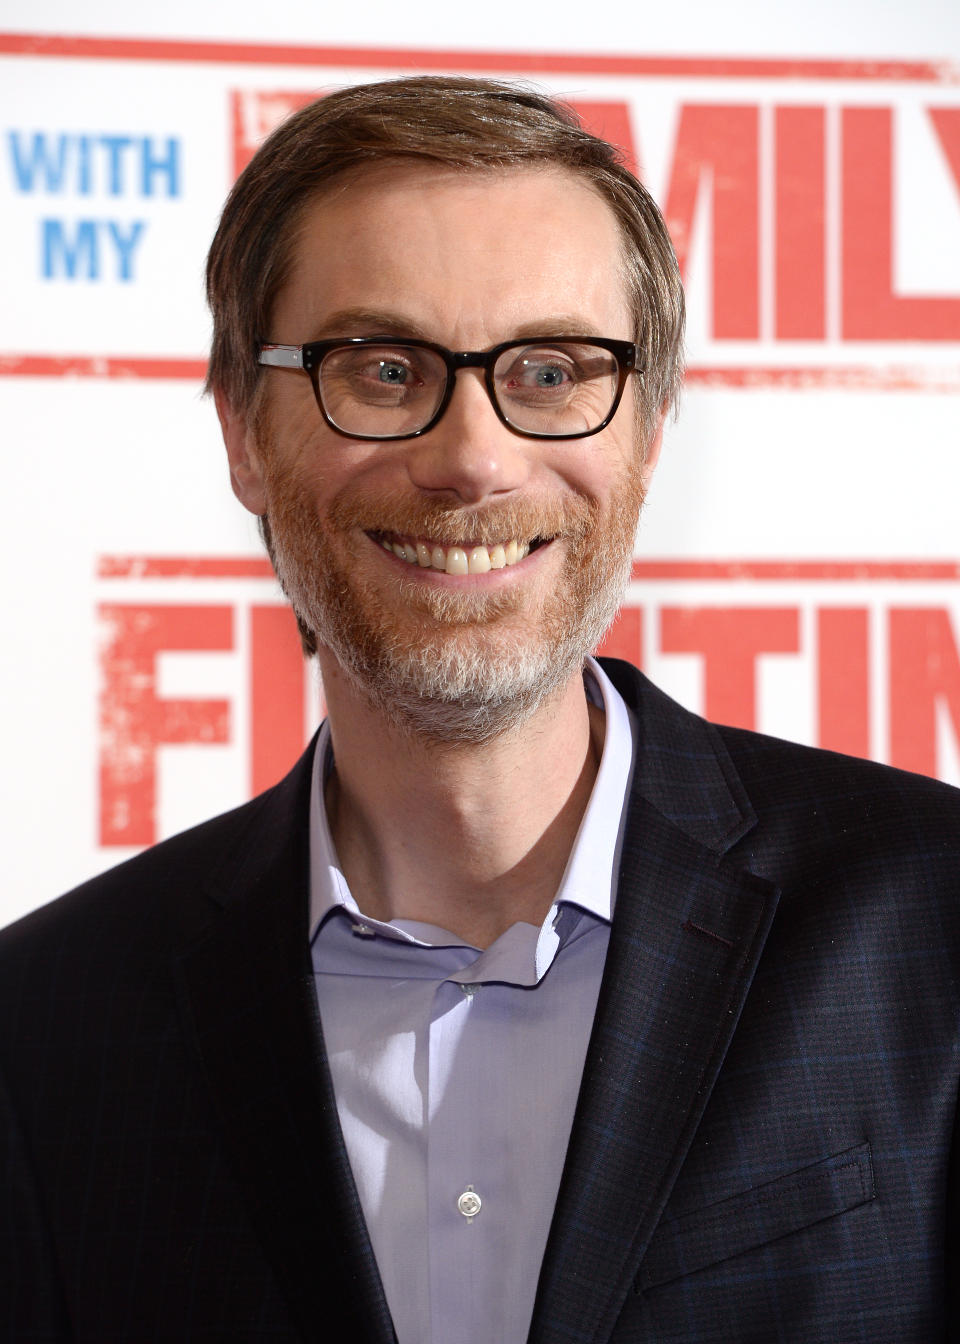 LONDON, ENGLAND – FEBRUARY 25: Stephen Merchant attends the UK Premiere of ‘Fighting With My Family’ at BFI Southbank on February 25, 2019 in London, England. (Photo by Eamonn M. McCormack/Eamonn M. McCormack/Getty Images)